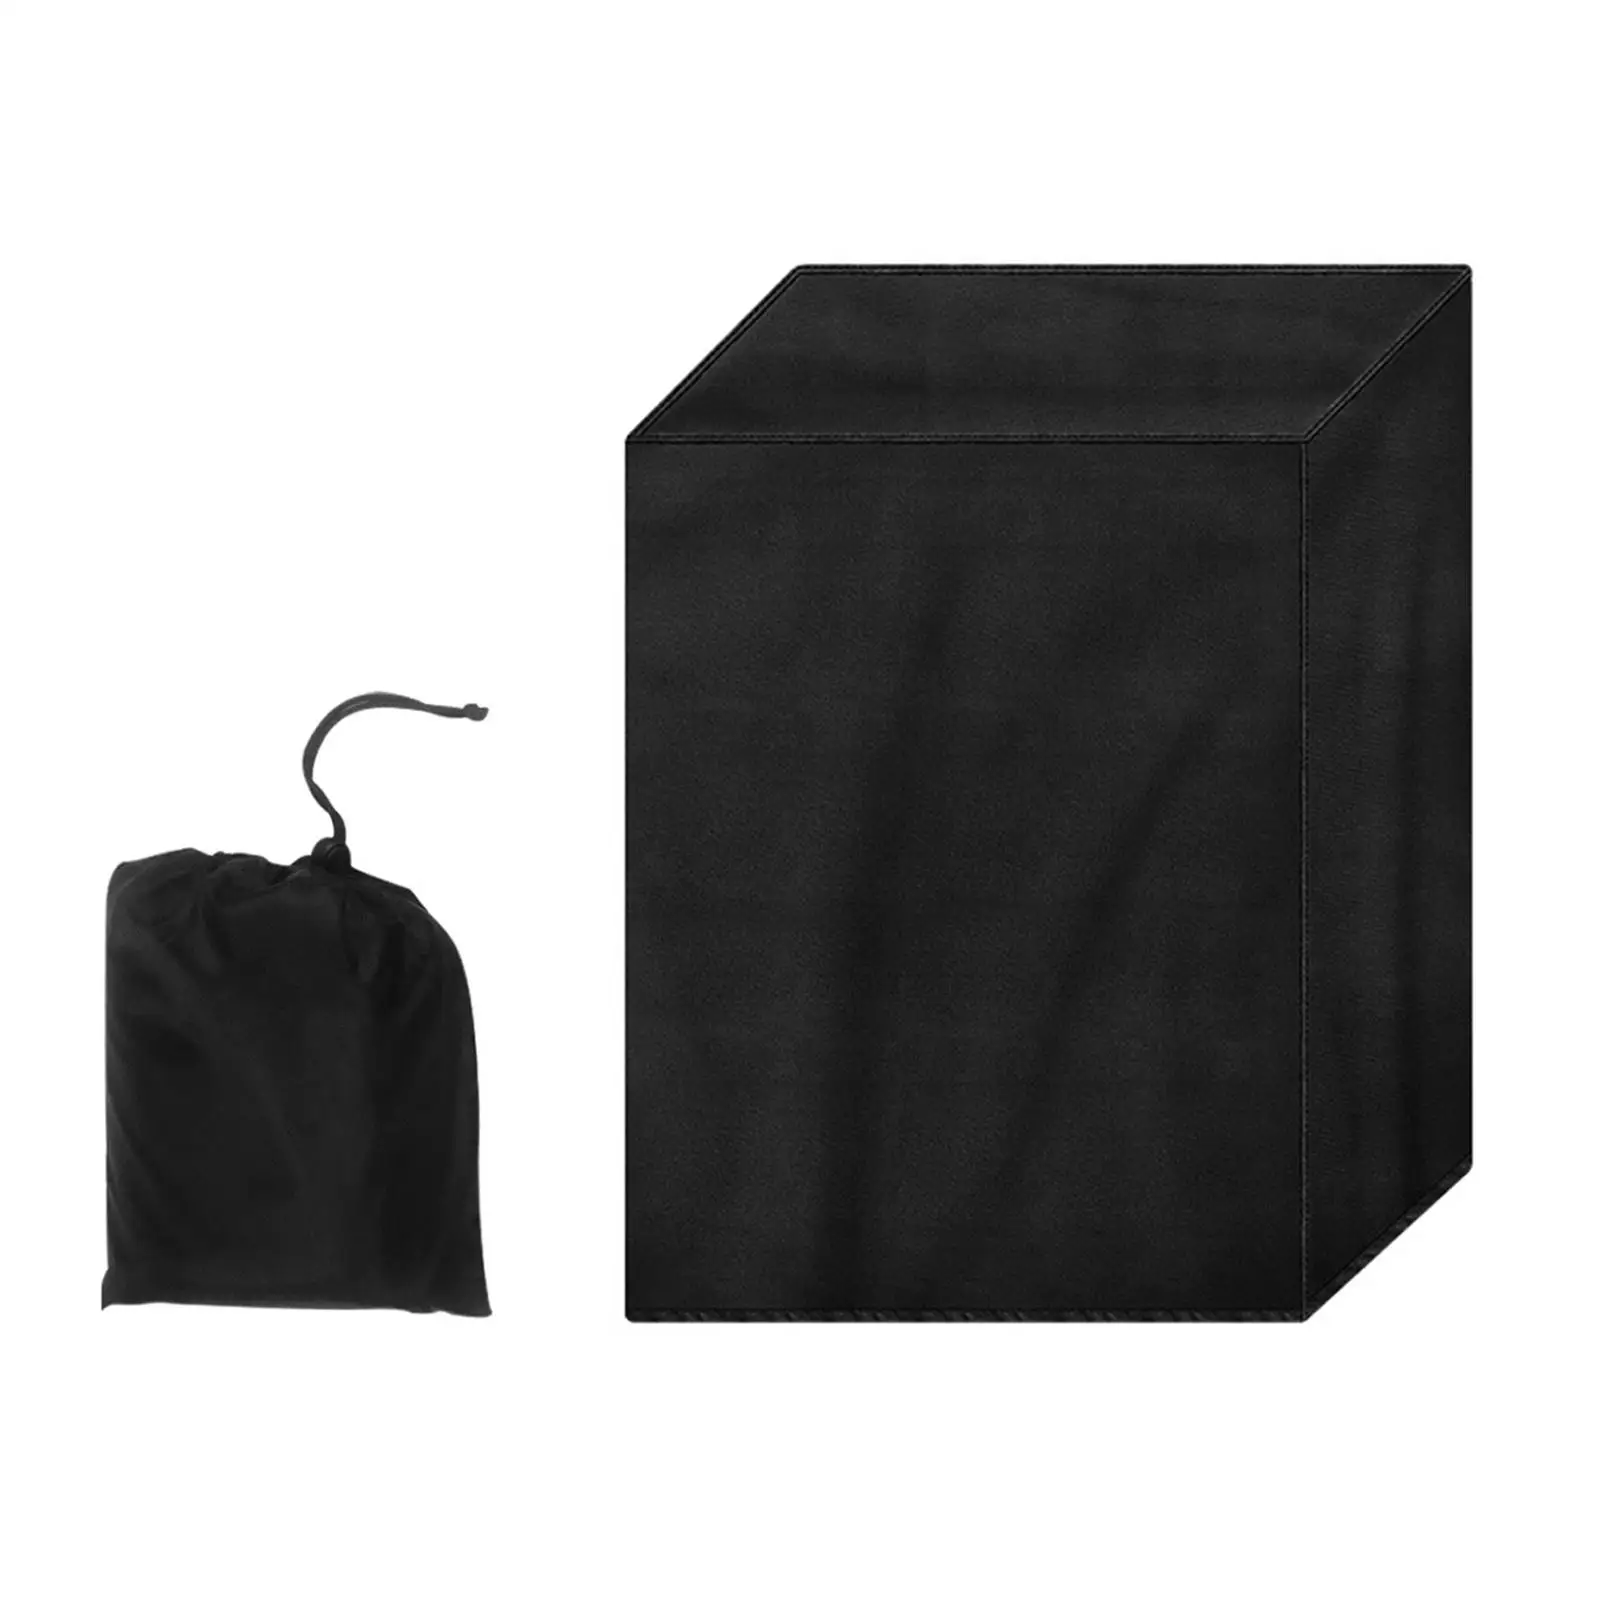 Patio Chair Cover Water Resistant Outdoor Furniture Furniture Protector with Storage Bag Patio Durable Furniture Covers